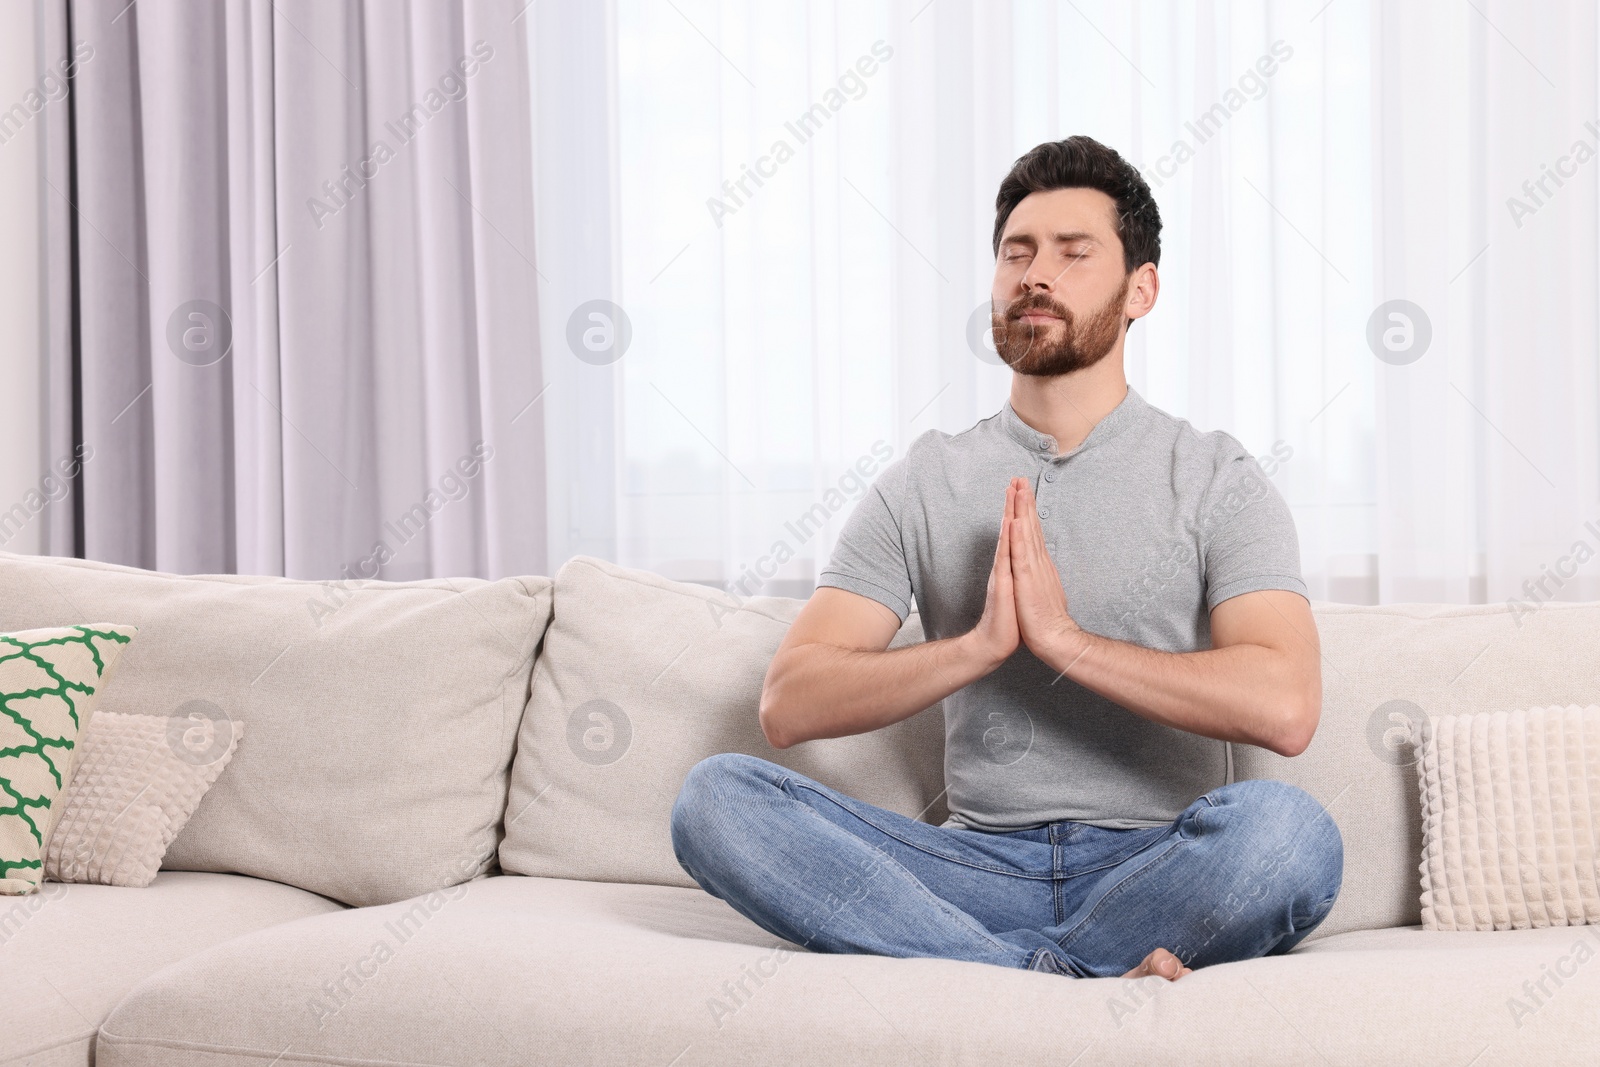 Photo of Man meditating on sofa at home, space for text